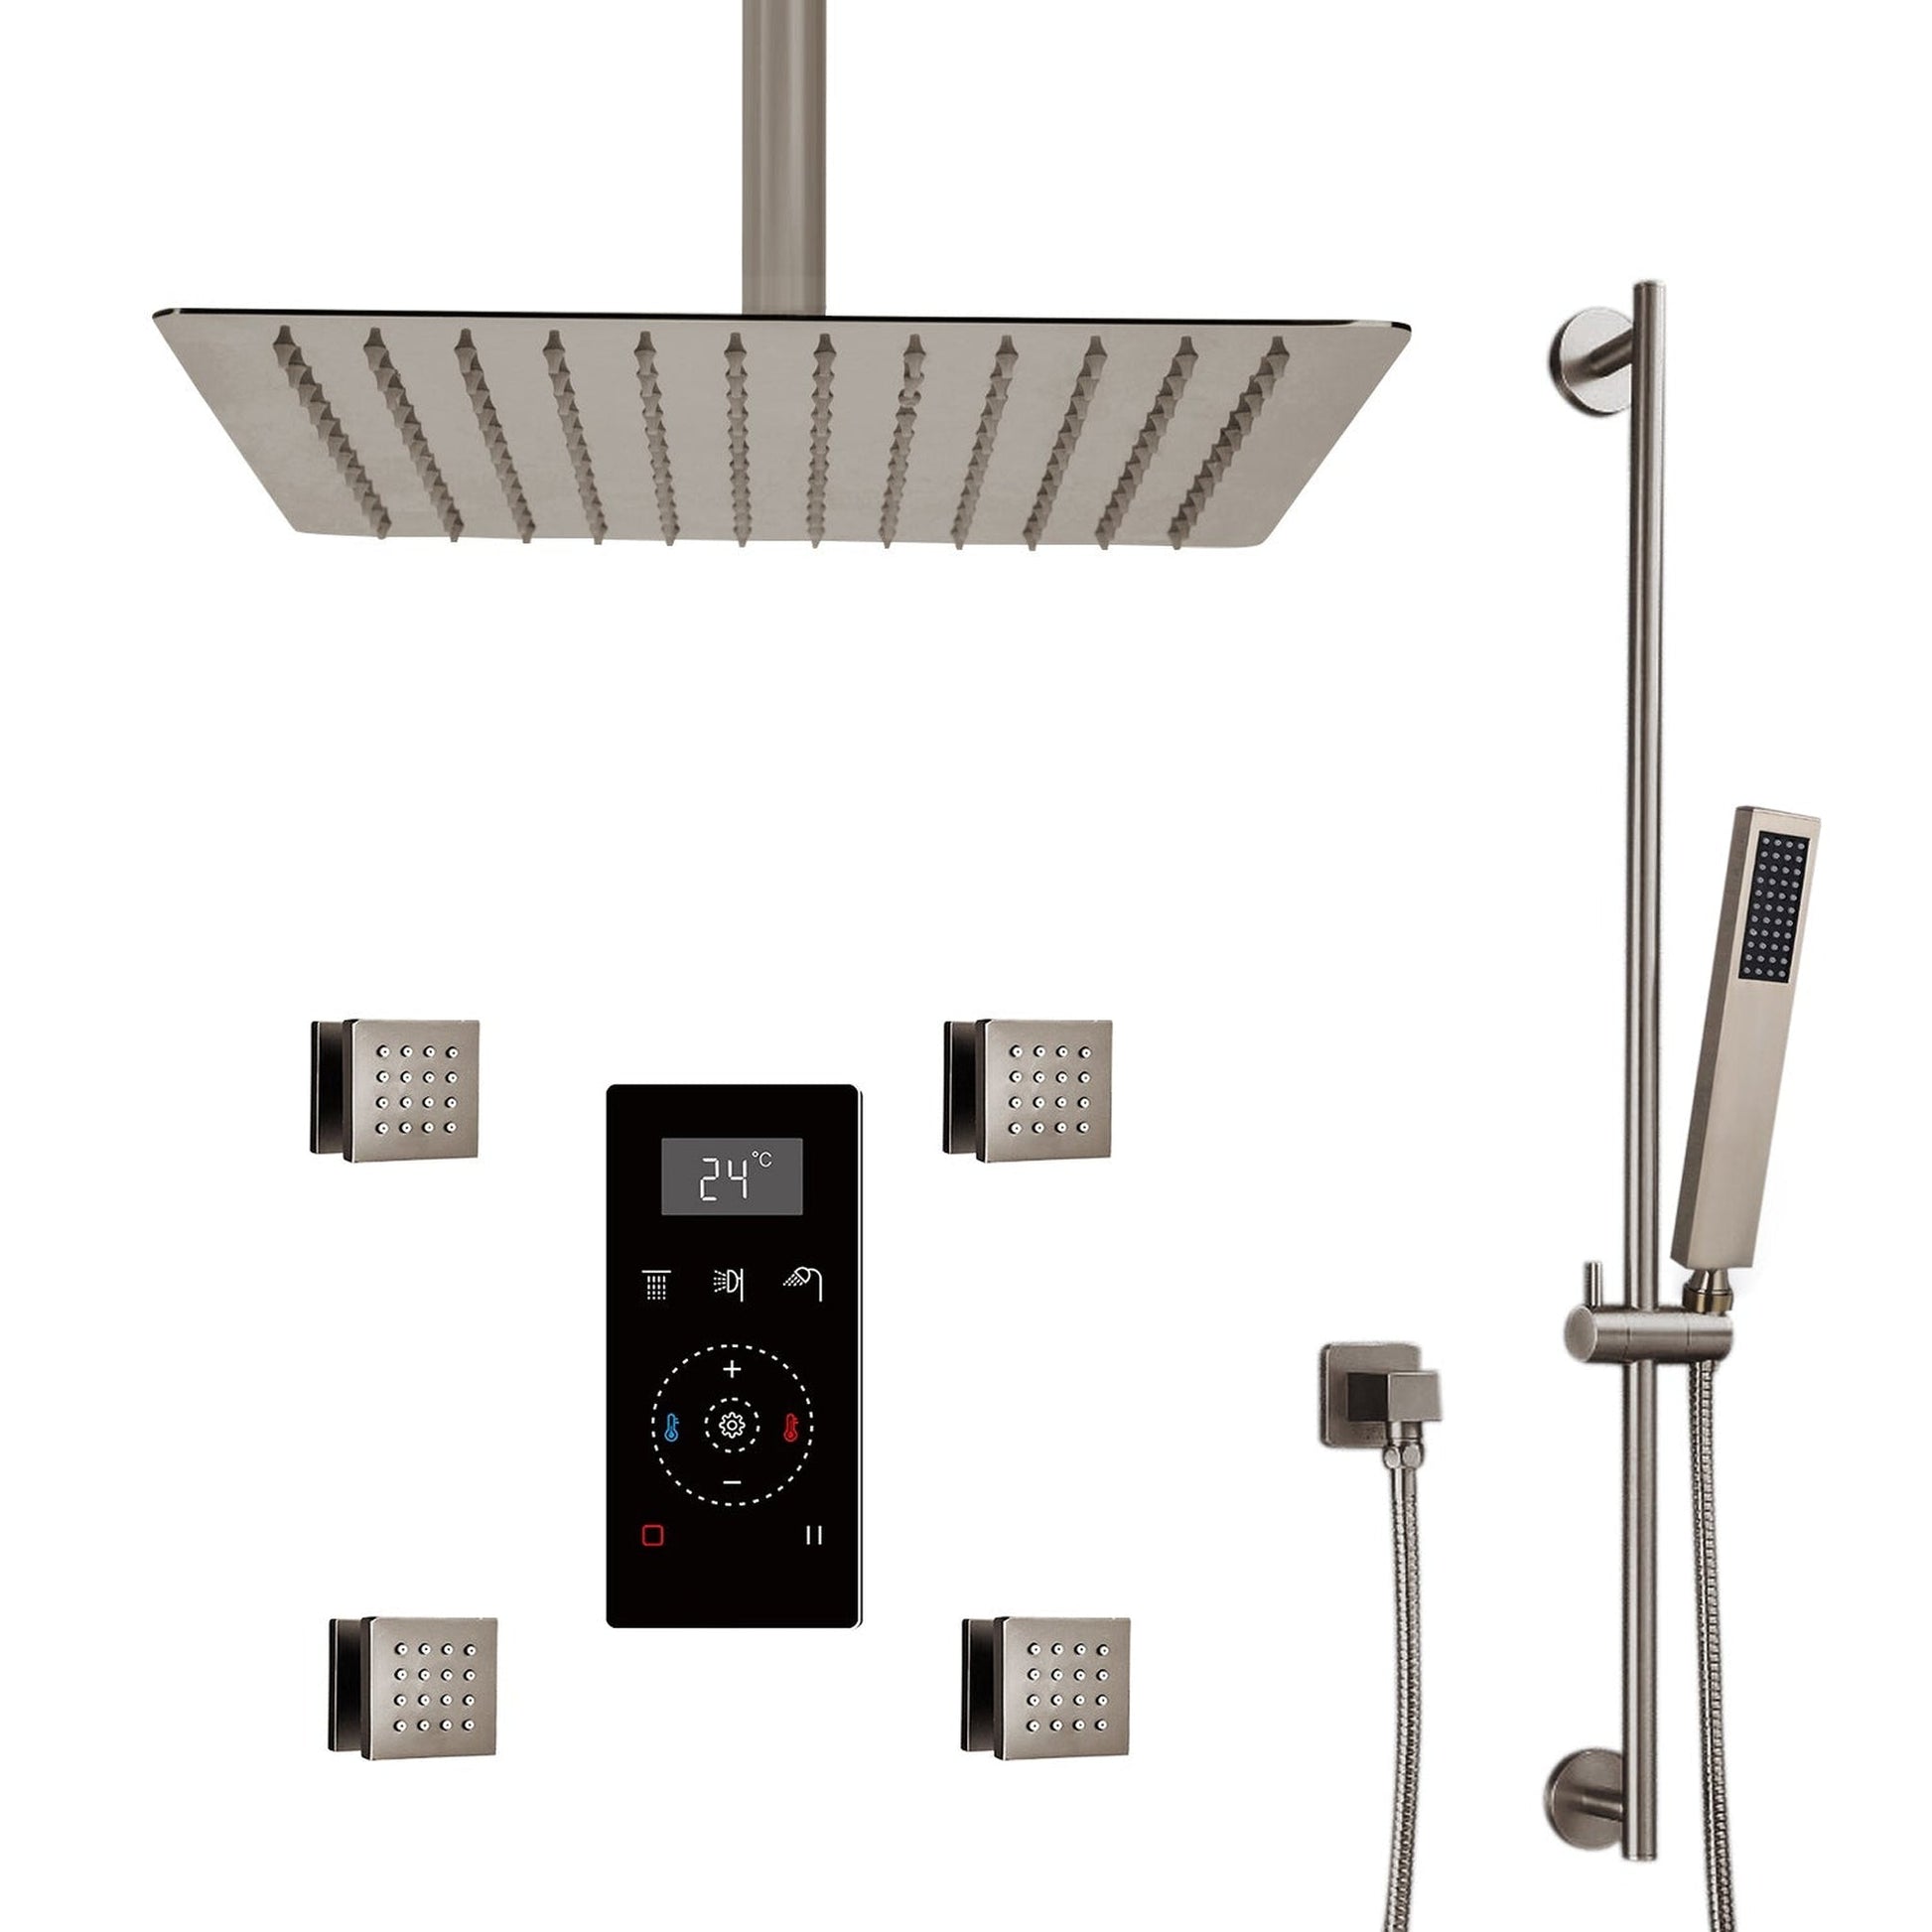 Fontana 8" Brushed Nickel Ceiling Mounted Rainfall Digital Thermostat Mixer Shower System With 4-Jet Body Spray, Hand Shower and Water Powered LED Lights